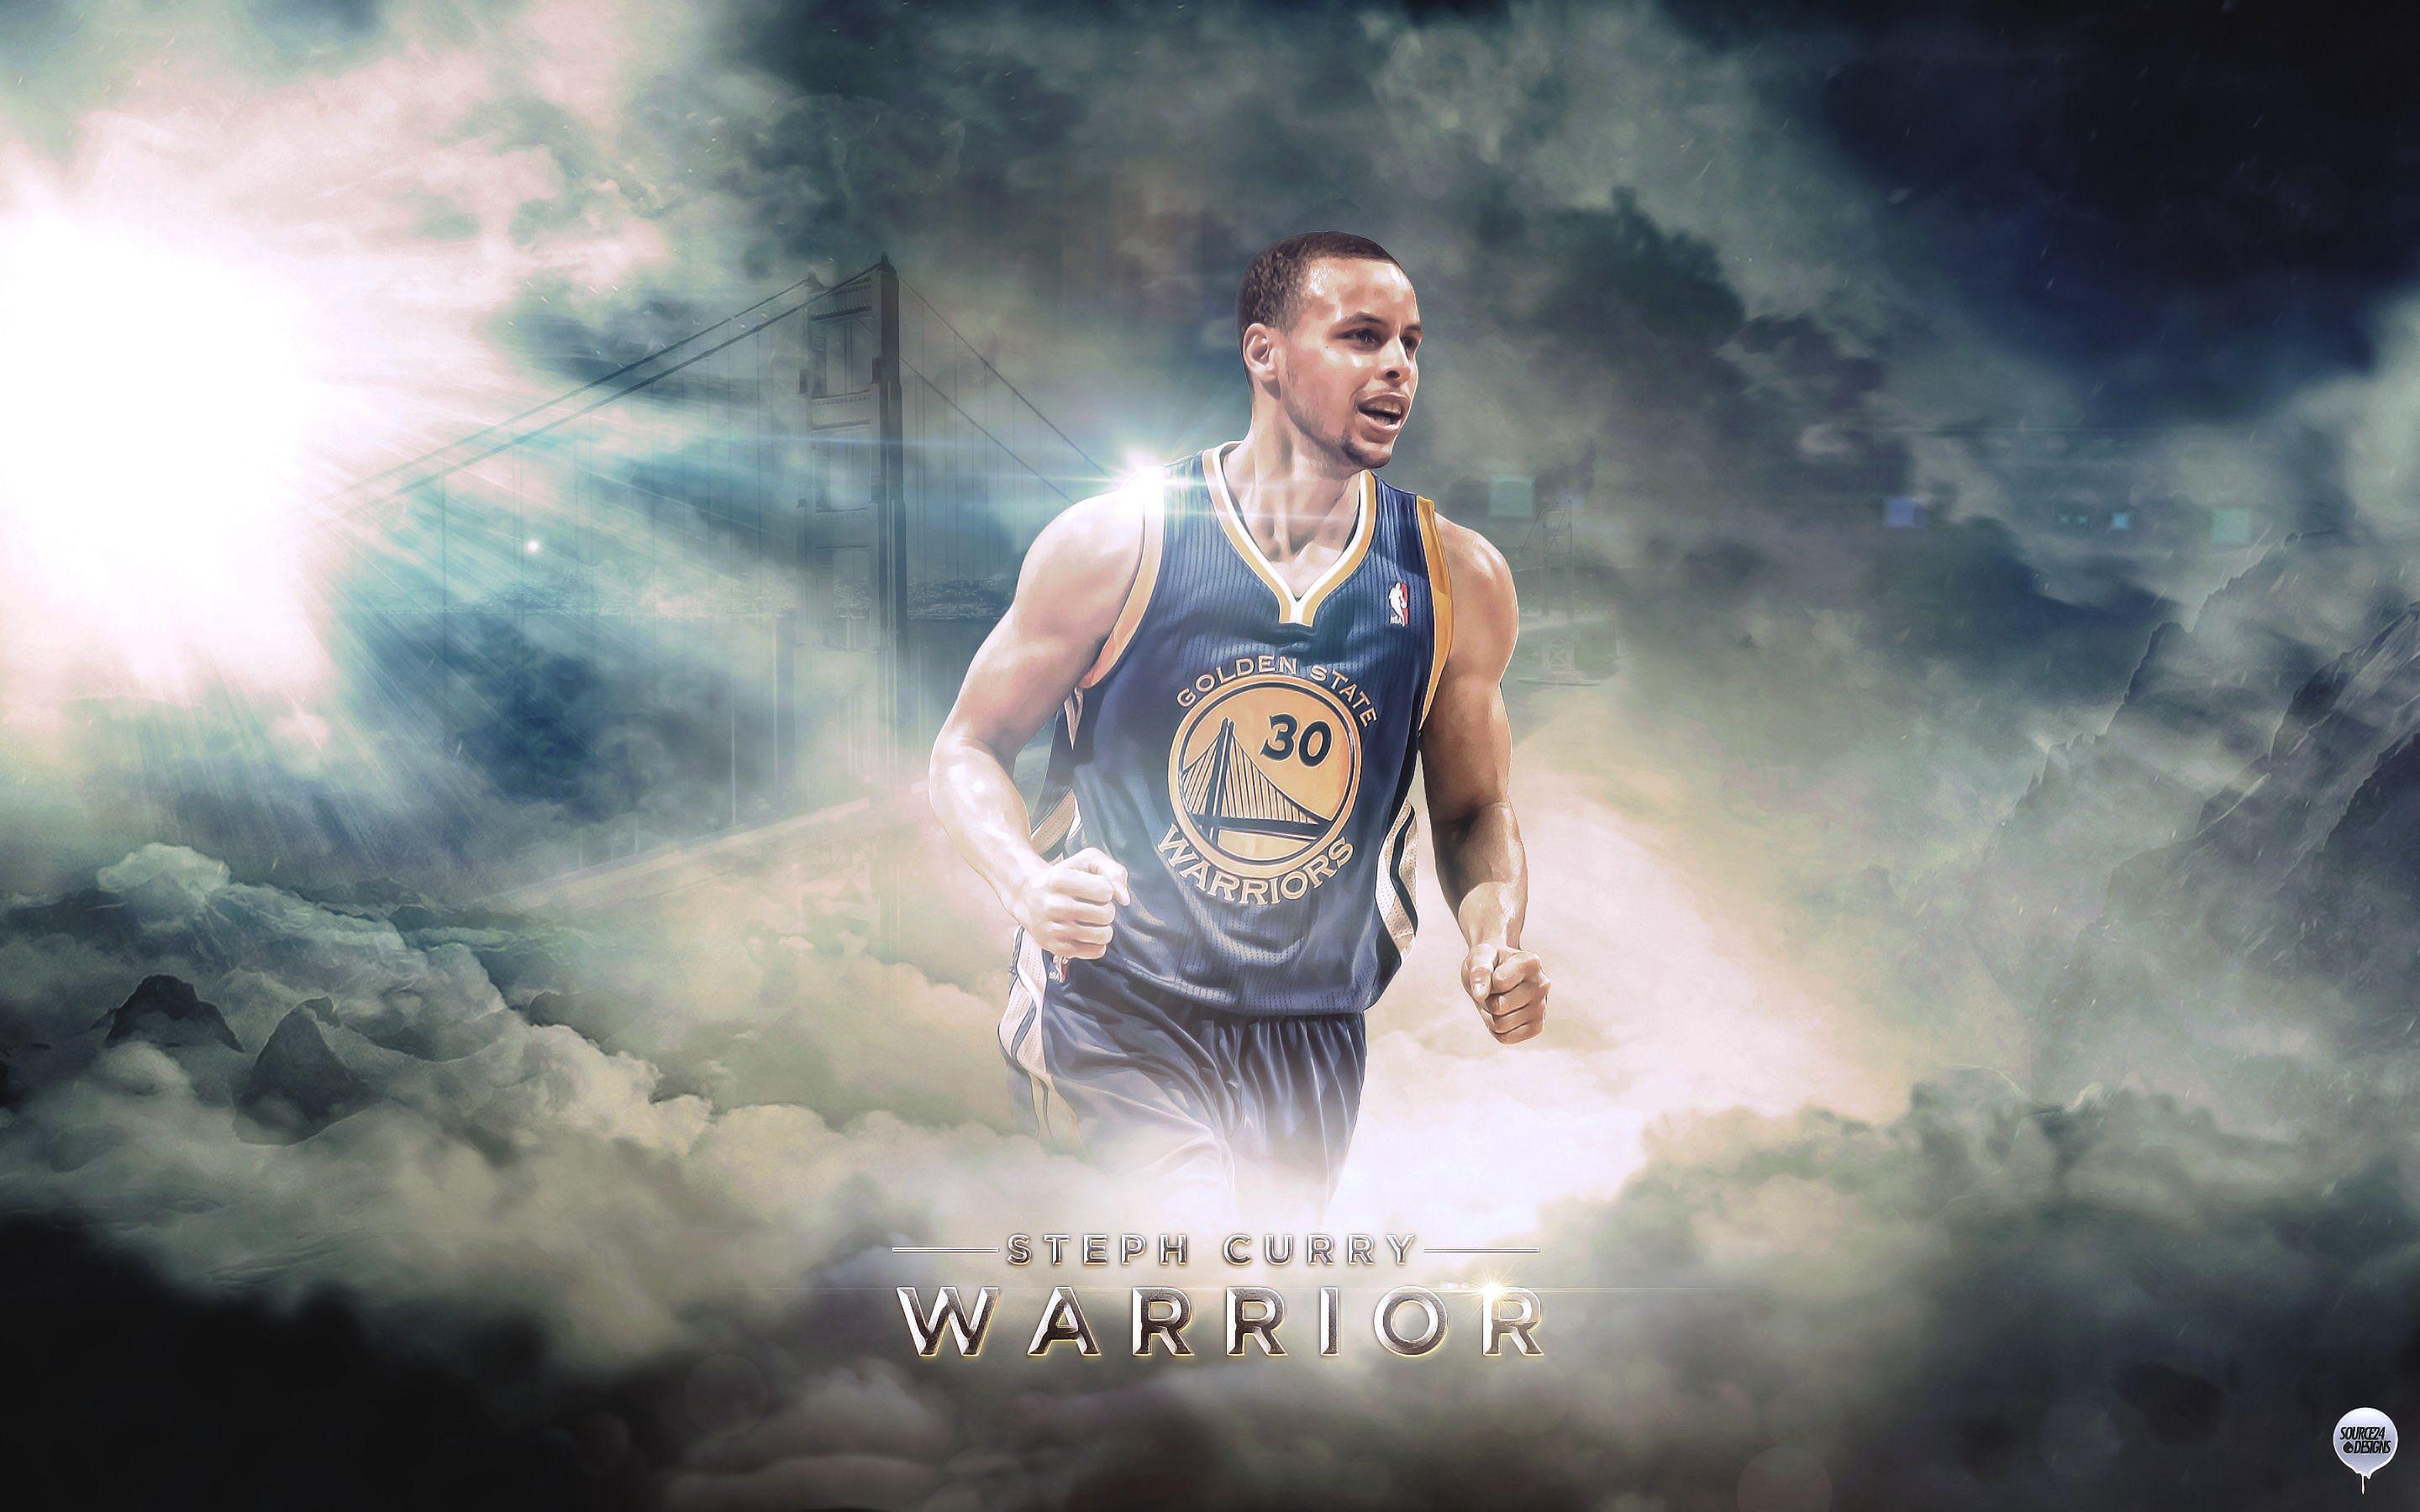 Stephen Curry Wallpaper Free Download. Wallpaper, Background